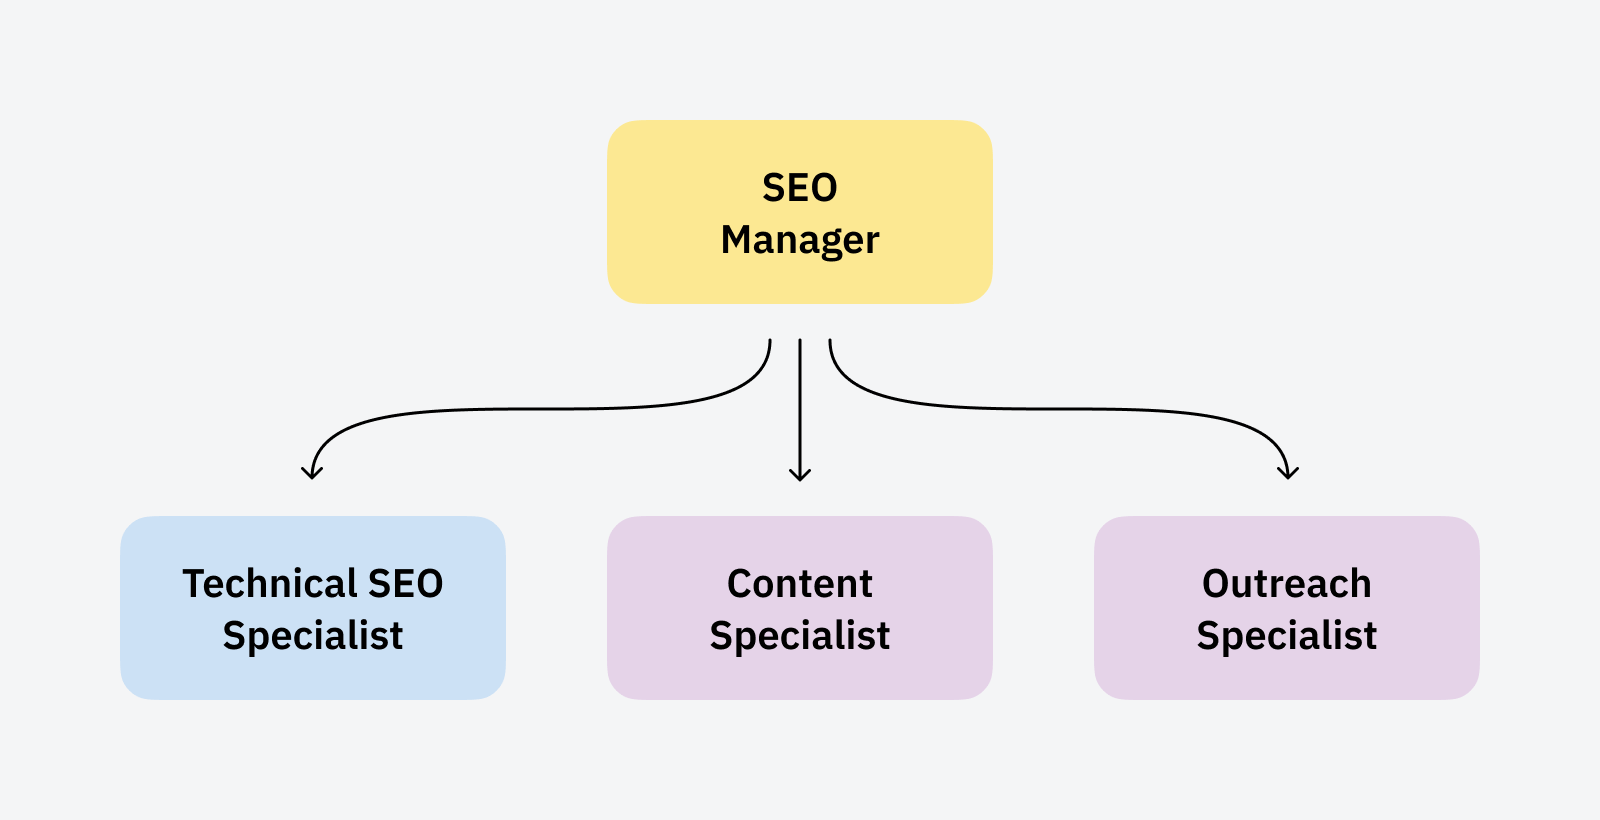 How to Build (And Structure) an SEO Team |